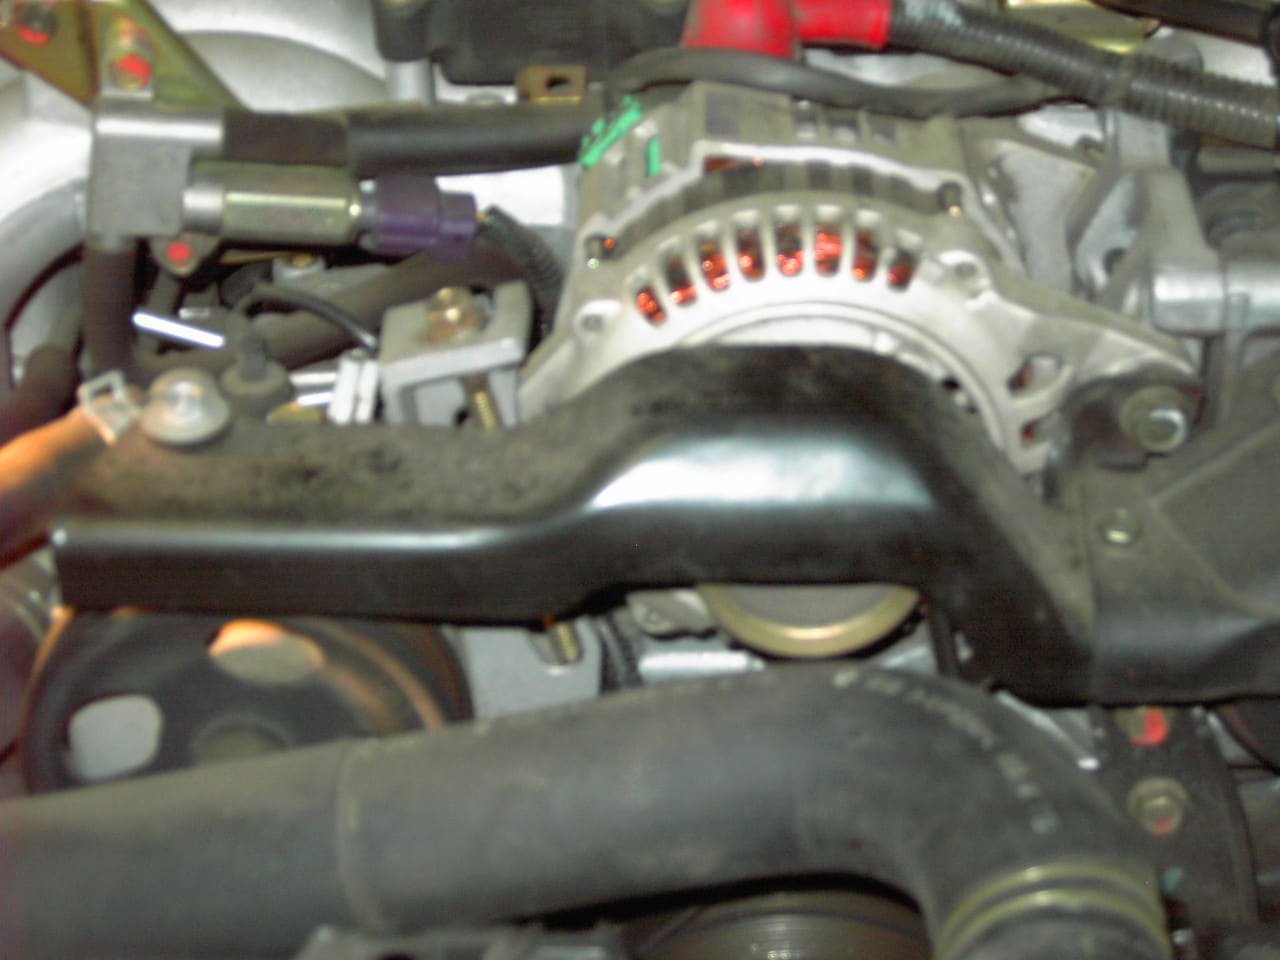 Troubleshooting 1996 Subaru Legacy’s Steering: Unveiling the Right Pull Mystery